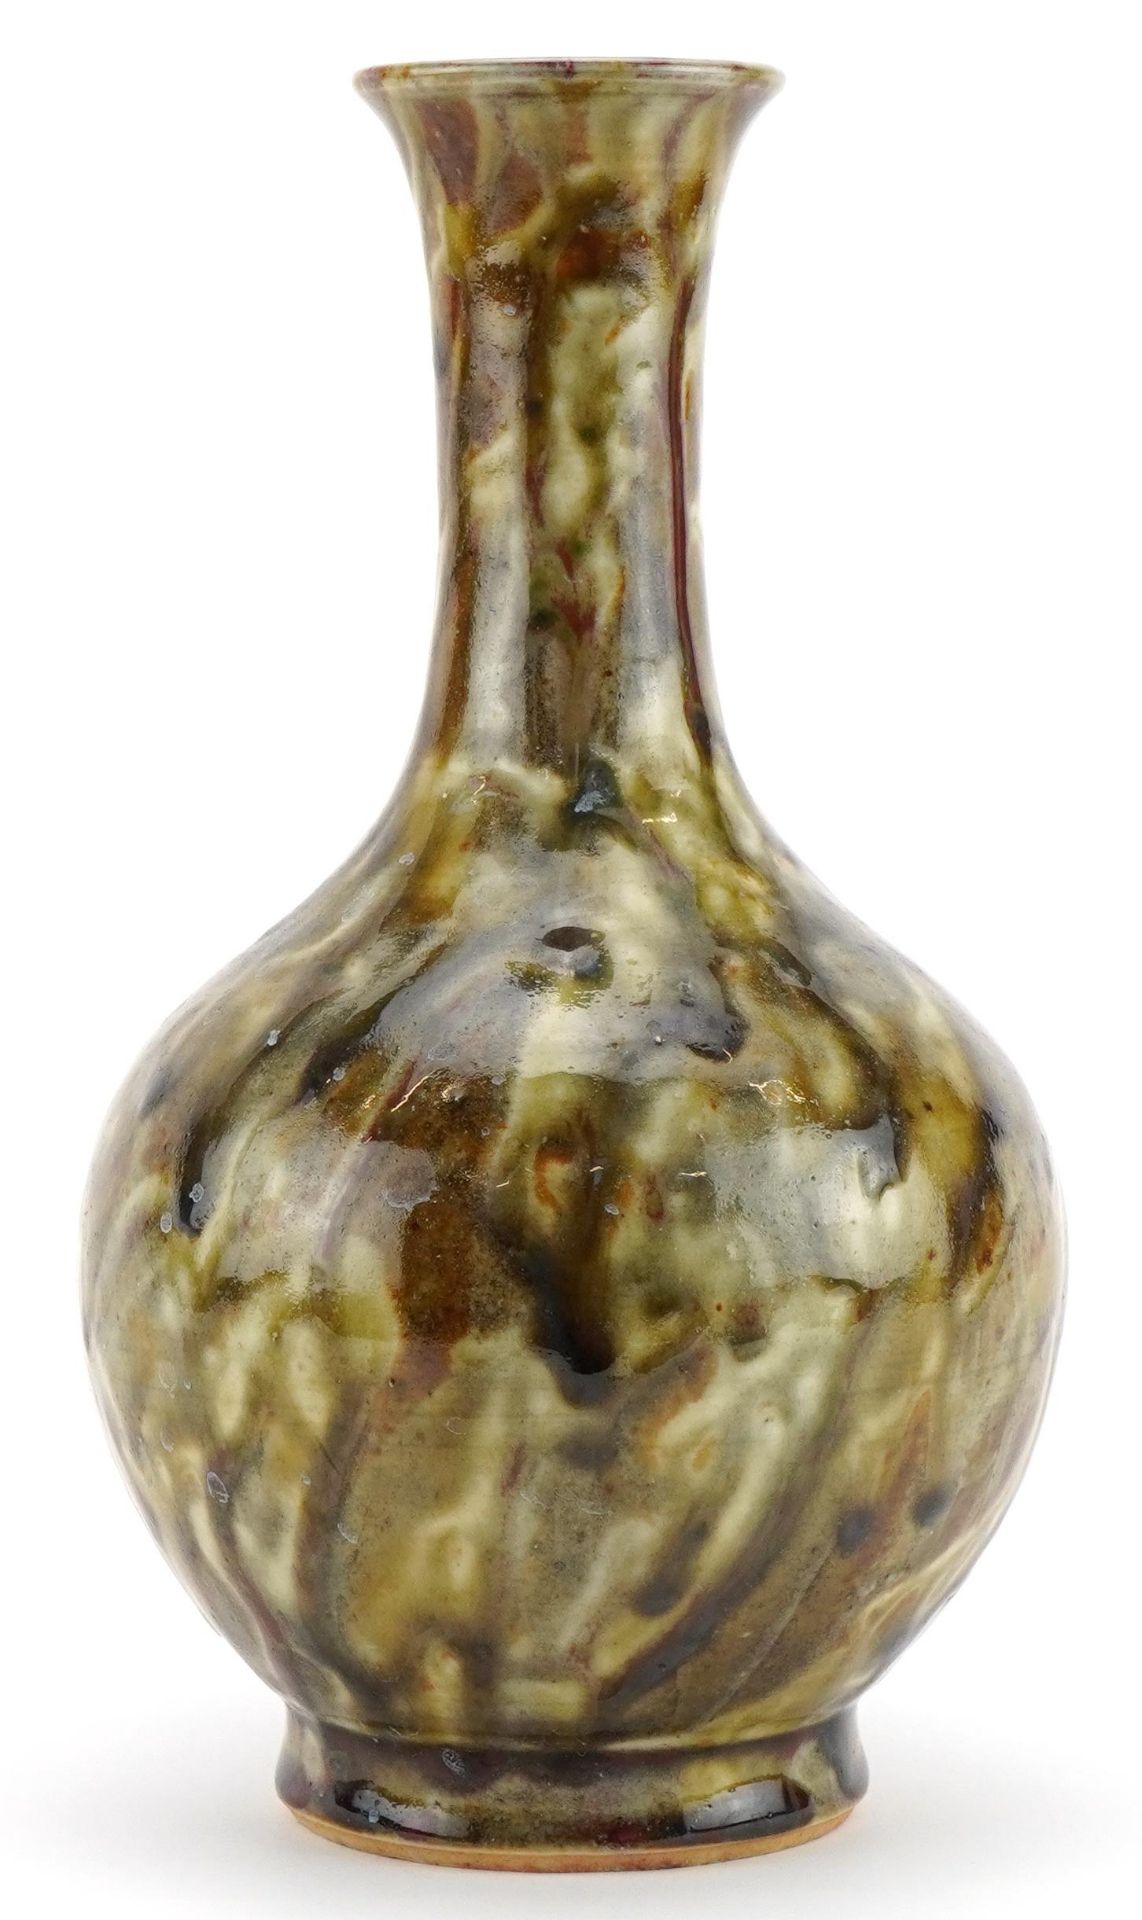 Chinese porcelain vase having a red and brown glaze, 22.5cm high